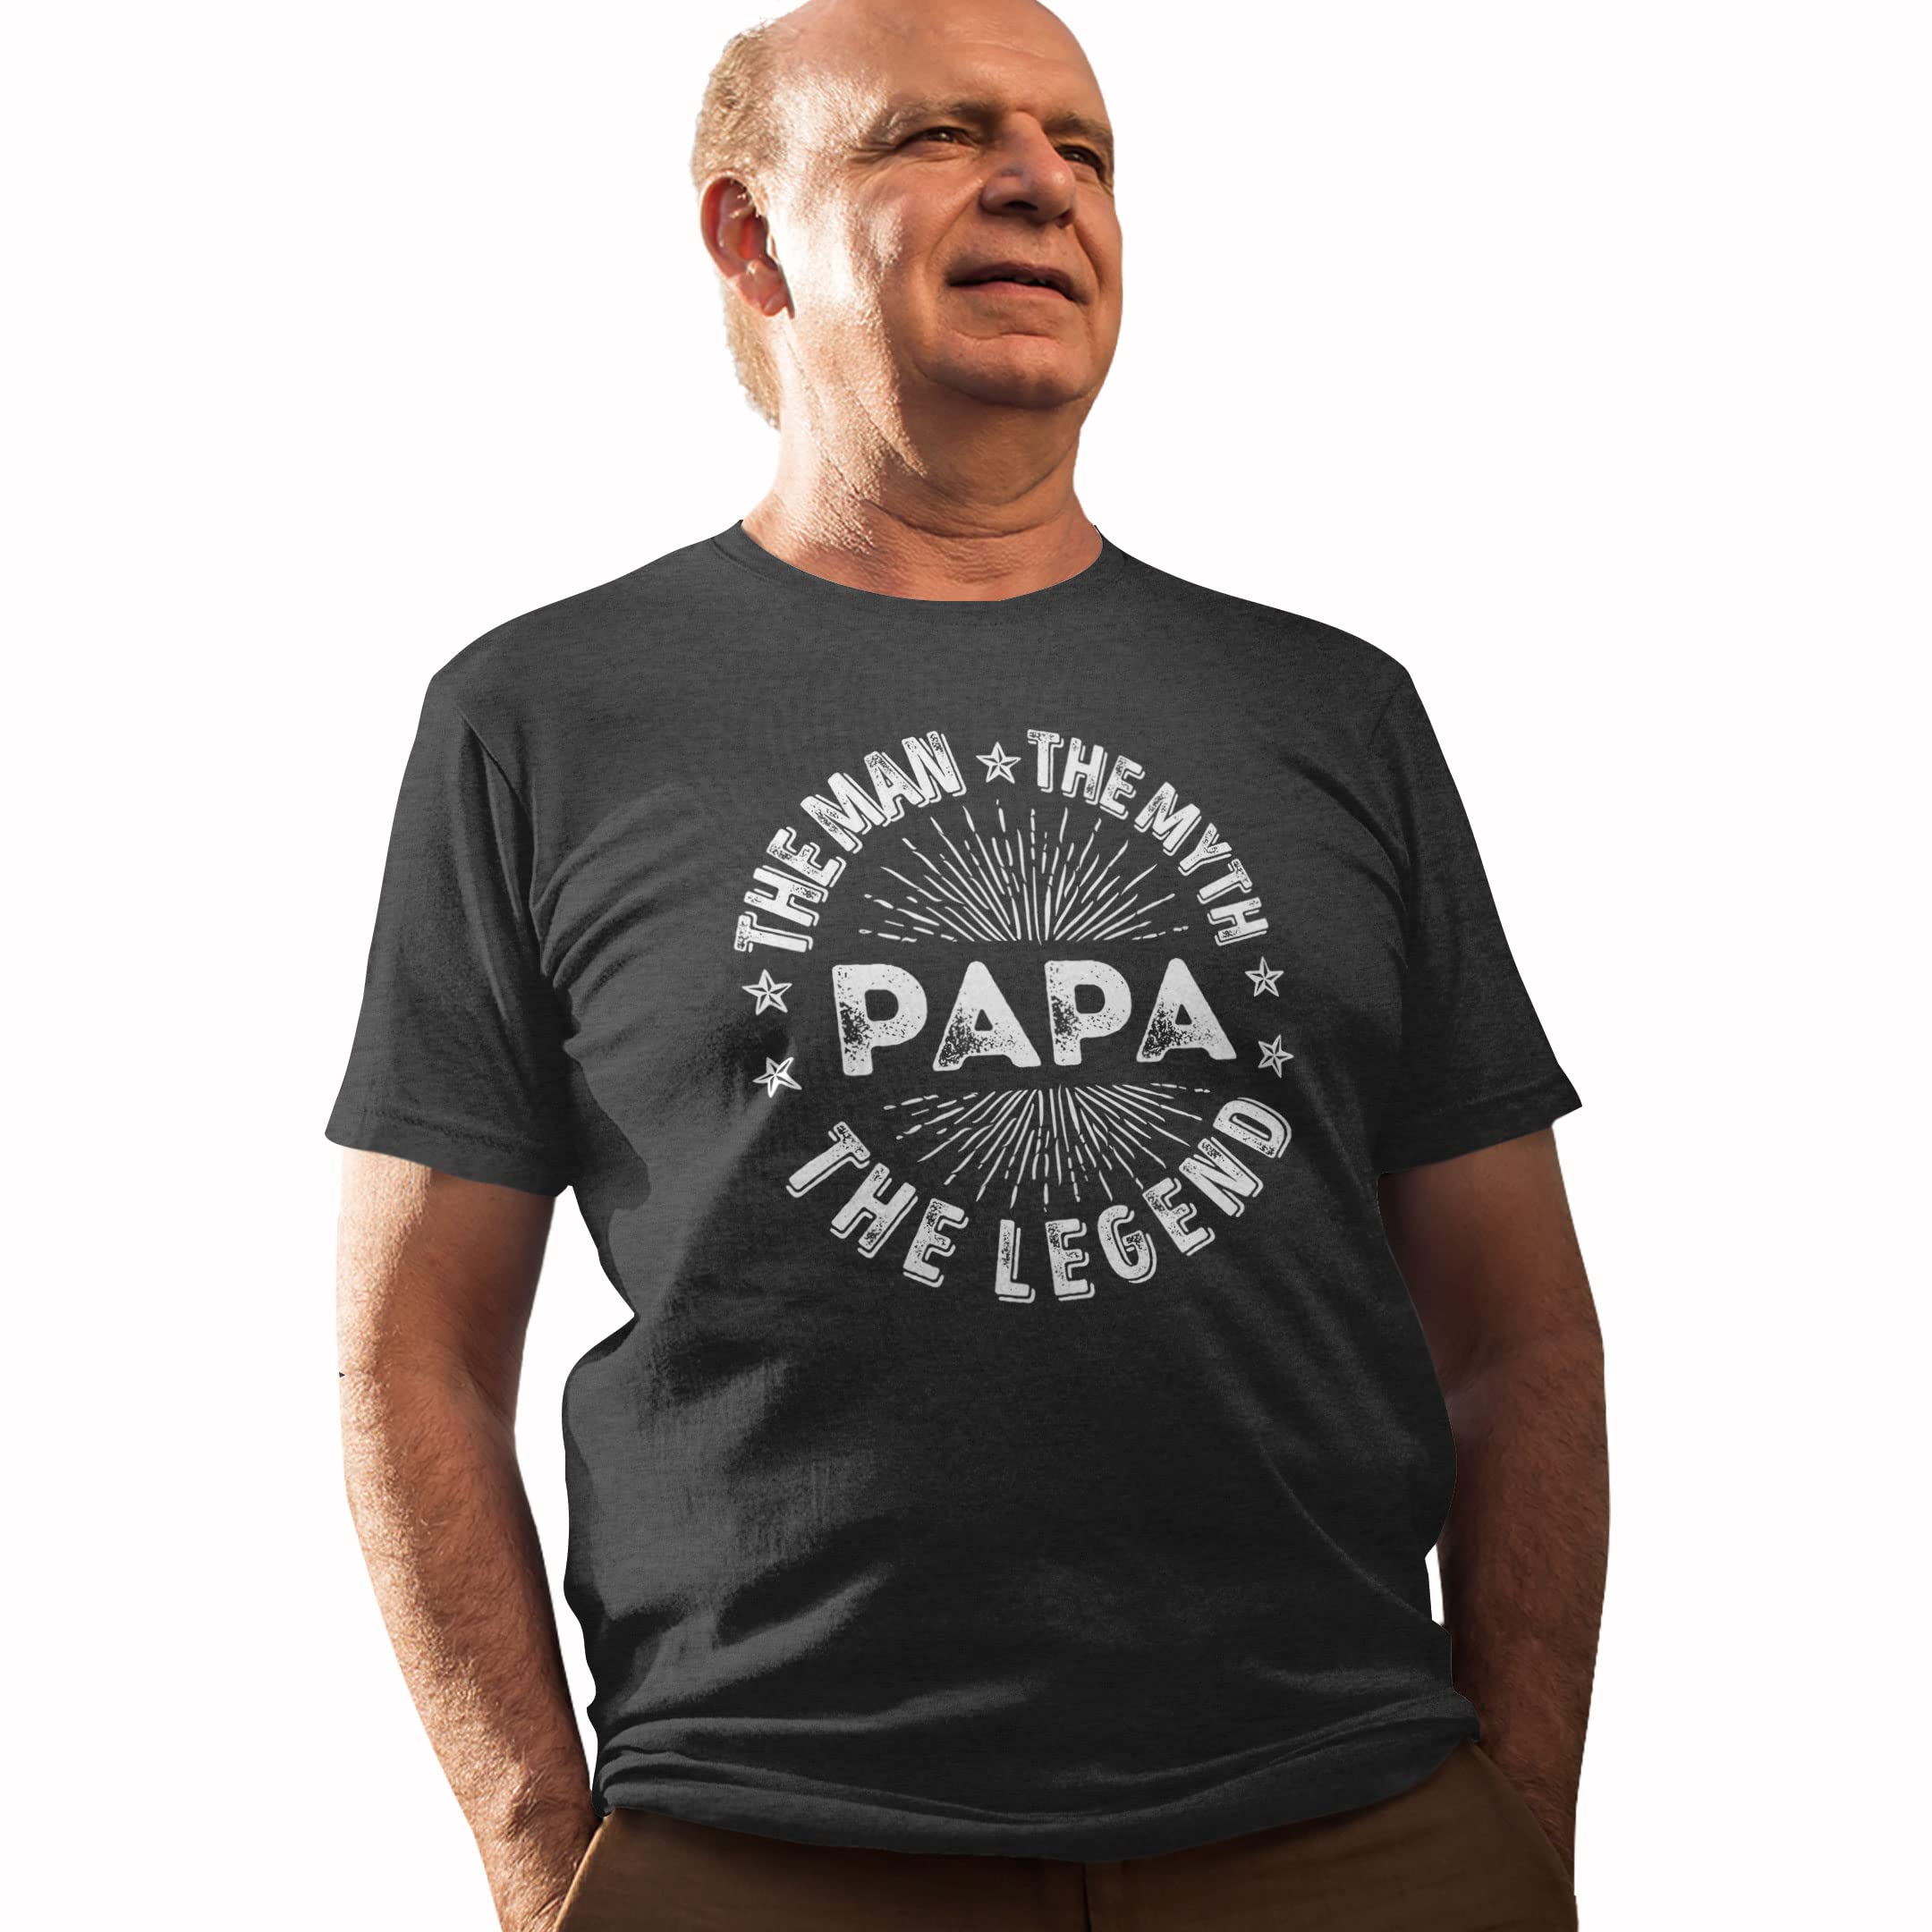 Man Myth Legend Papa, Gift for Papa, Funny Shirt for Papa, for Dad